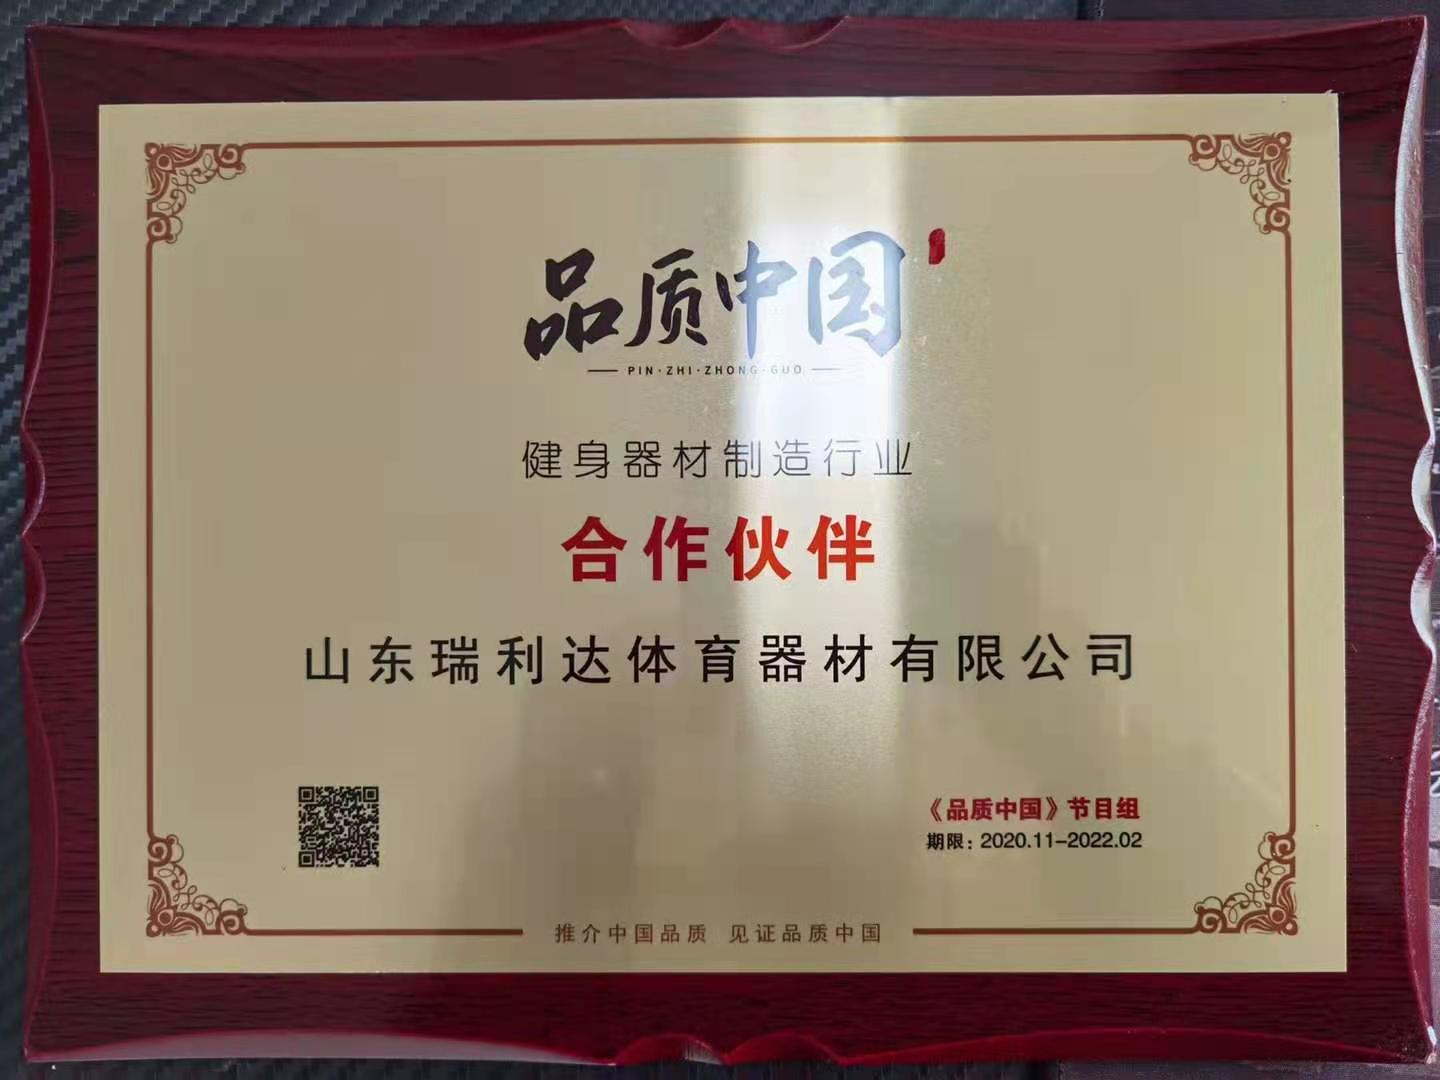 Realleader was shortlisted for the Chinese brand development project (1)